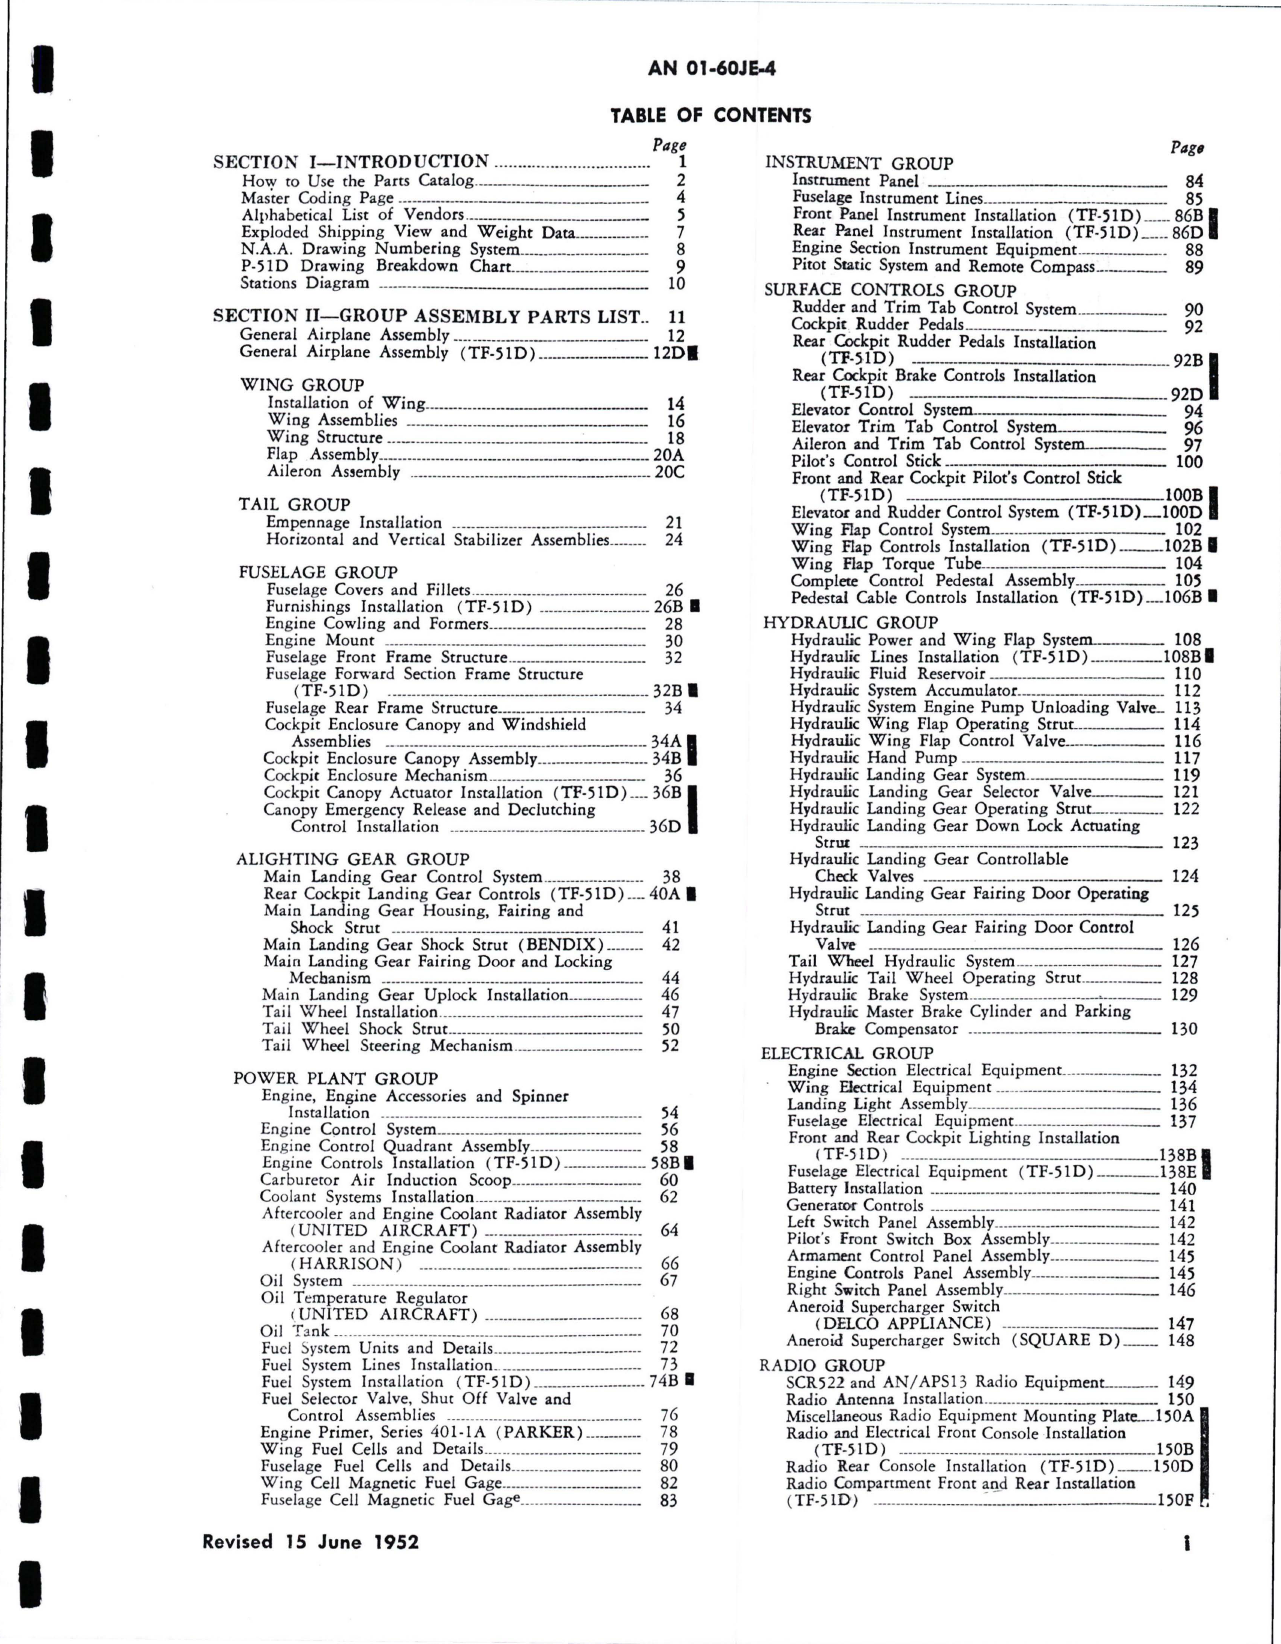 Sample page 5 from AirCorps Library document: Parts Catalog for F-51D, TF-51D and F-51K